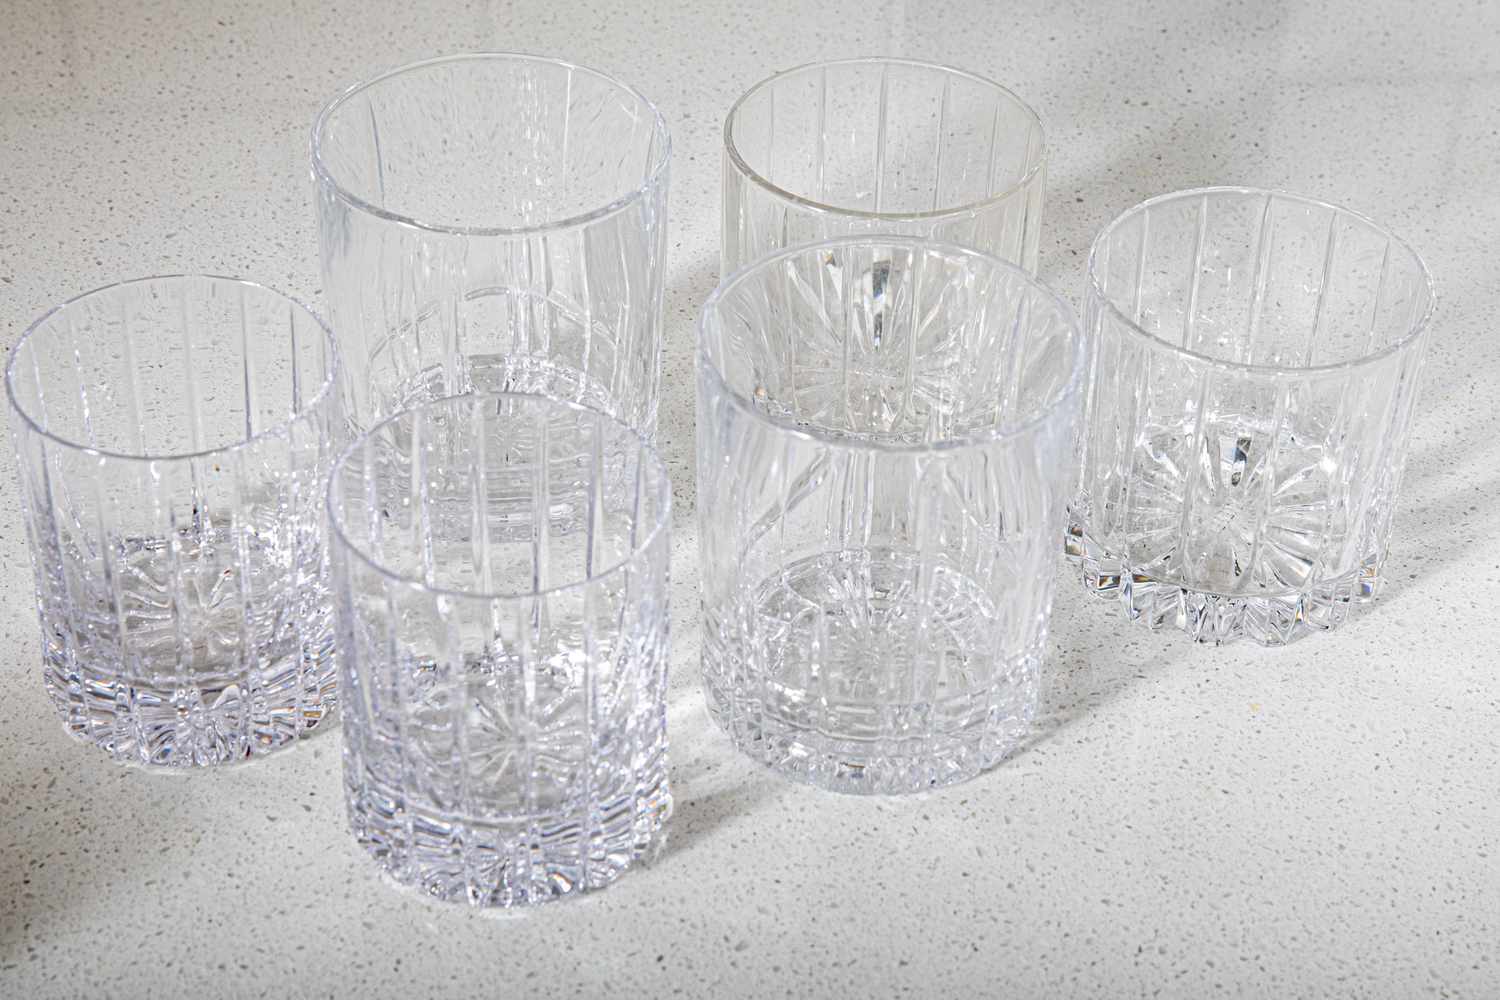 a collection of whiskey glasses on a kitchen countertop